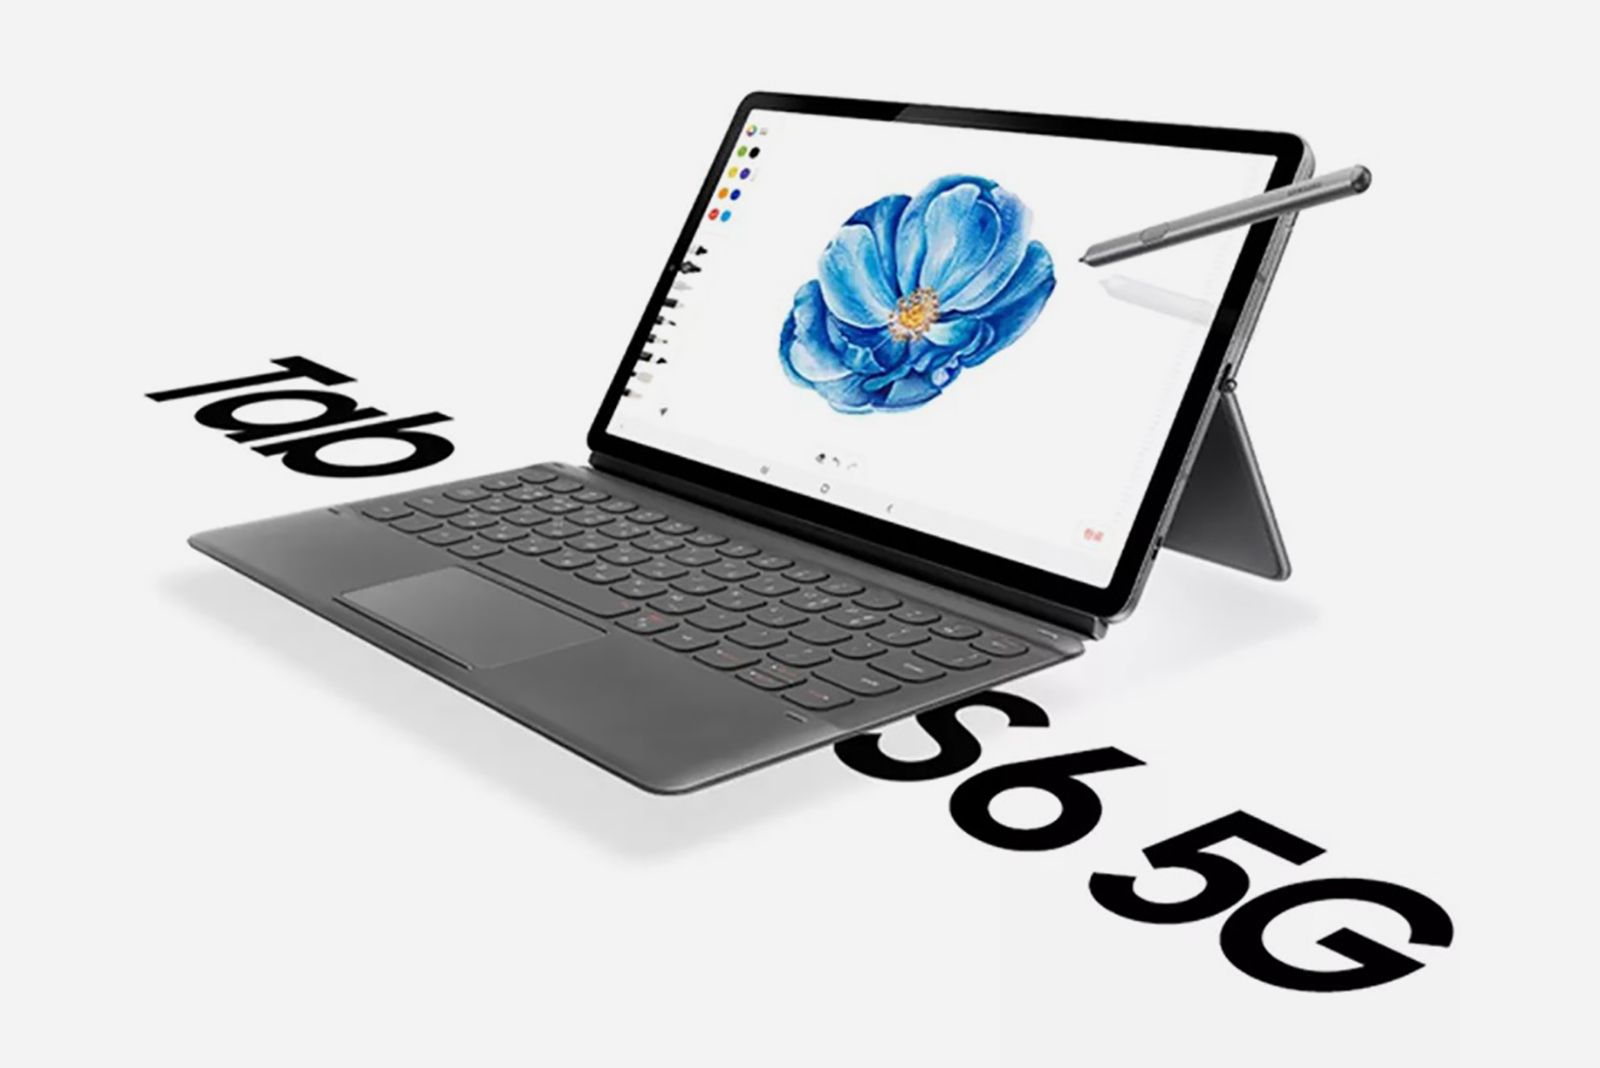 Samsung updates its Galaxy Tab S6 with 5G calls it the world’s first 5G tablet image 1